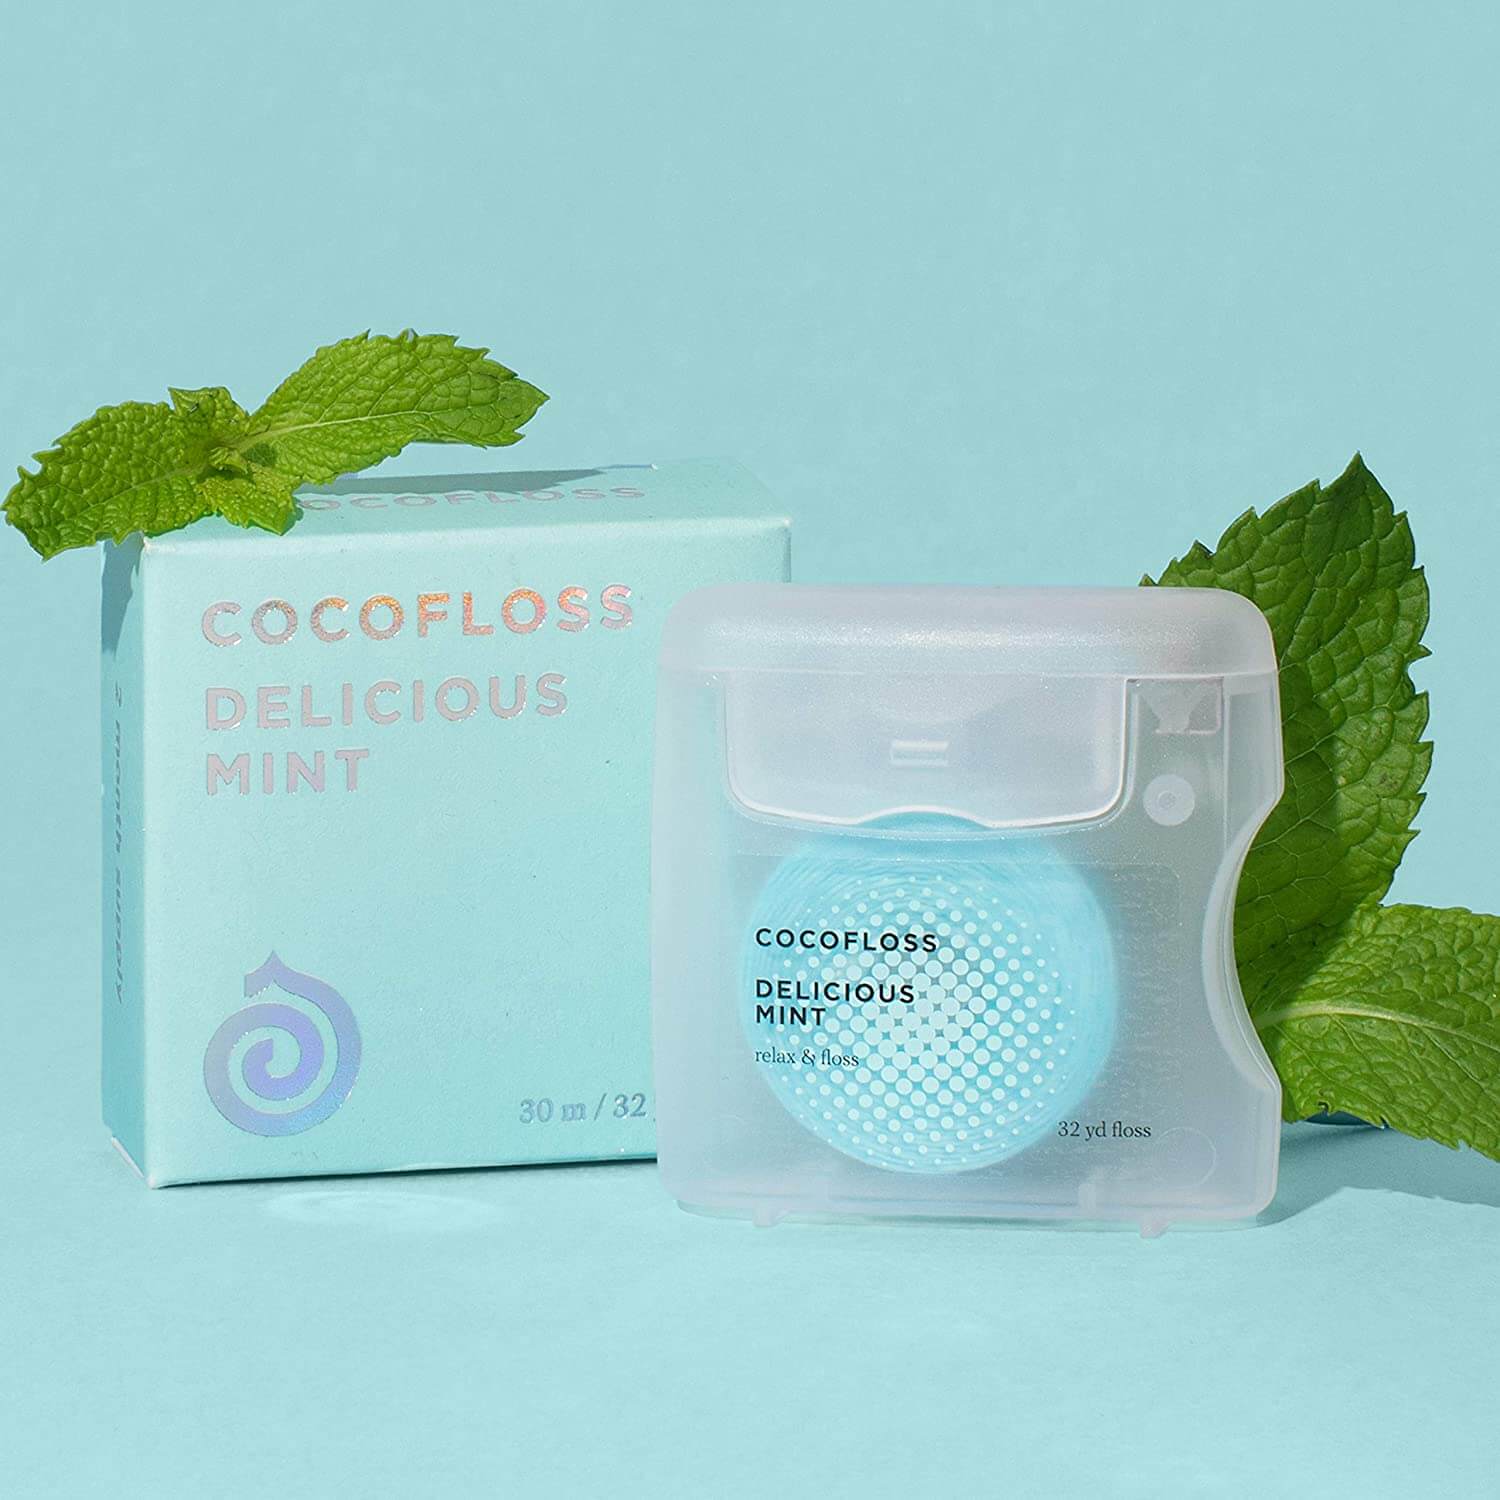 Cocofloss in Delicious Mint